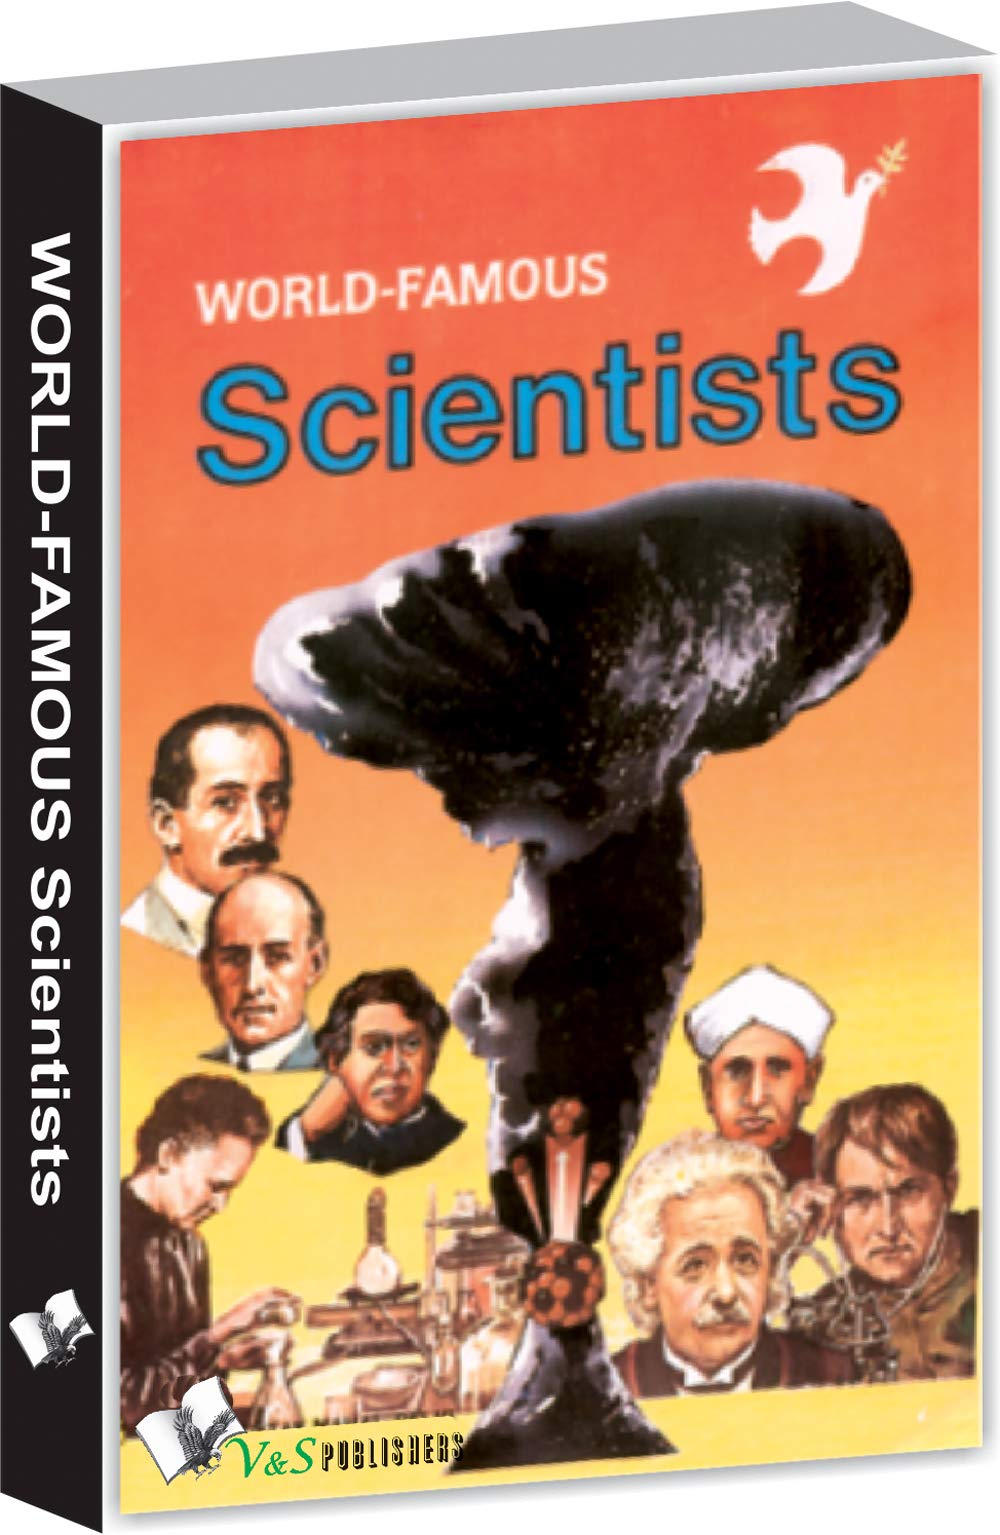 WORLD FAMOUS SCIENTISTS